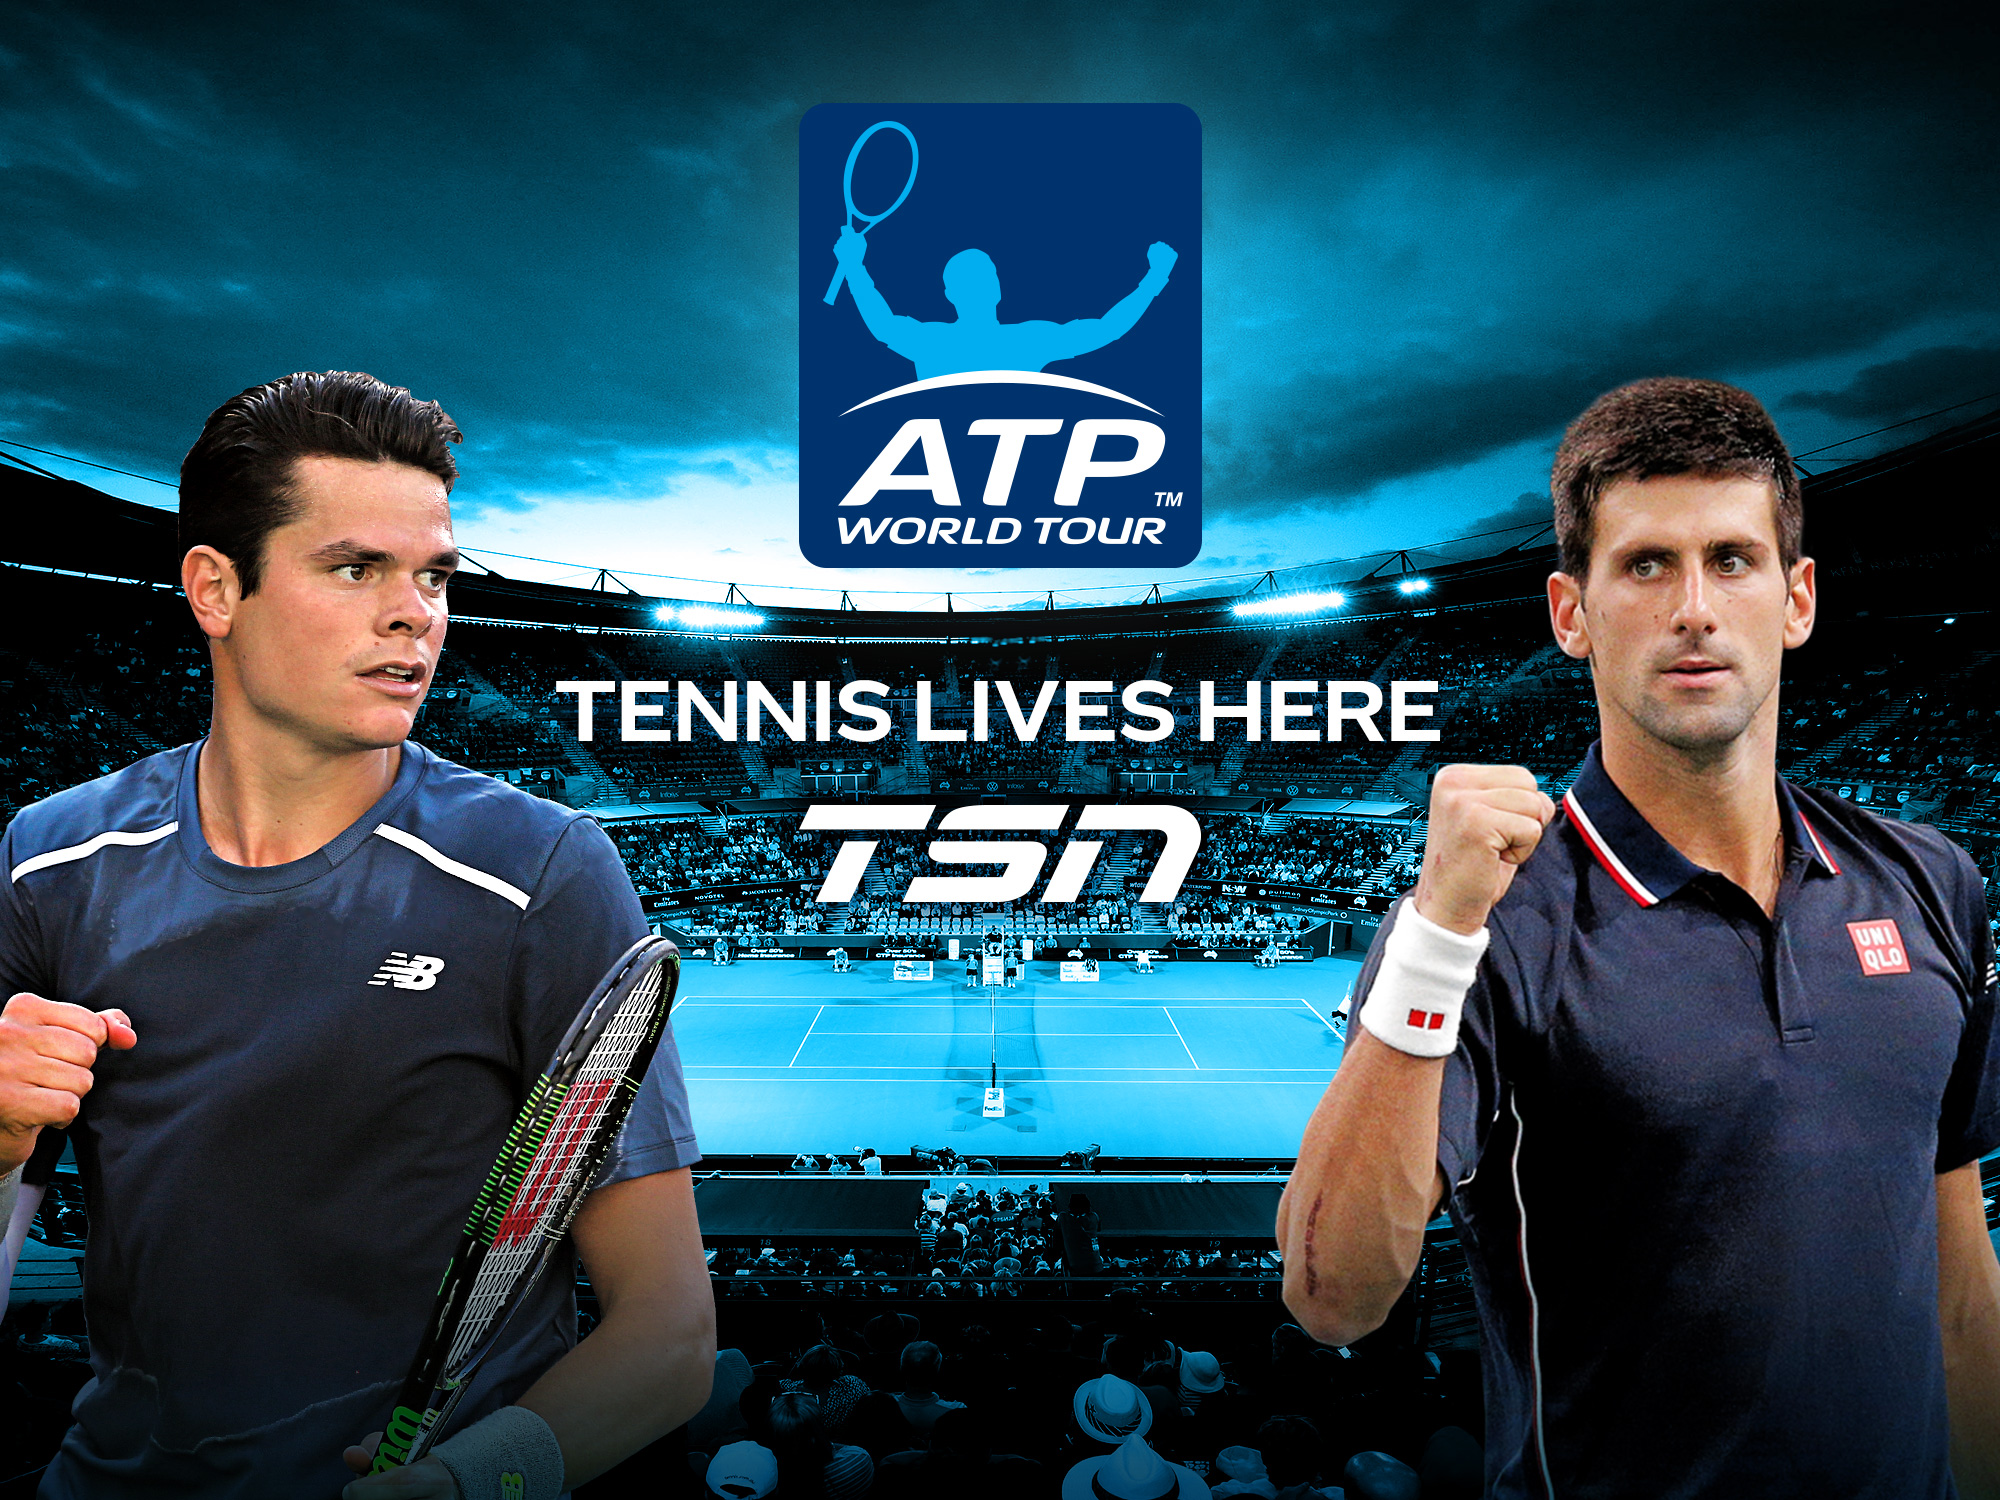 TSN Confirms Massive Slate of ATP Tennis Coverage, Kicking Off with ABN AMRO WORLD TENNIS TOURNAMENT from Rotterdam, Beginning Today